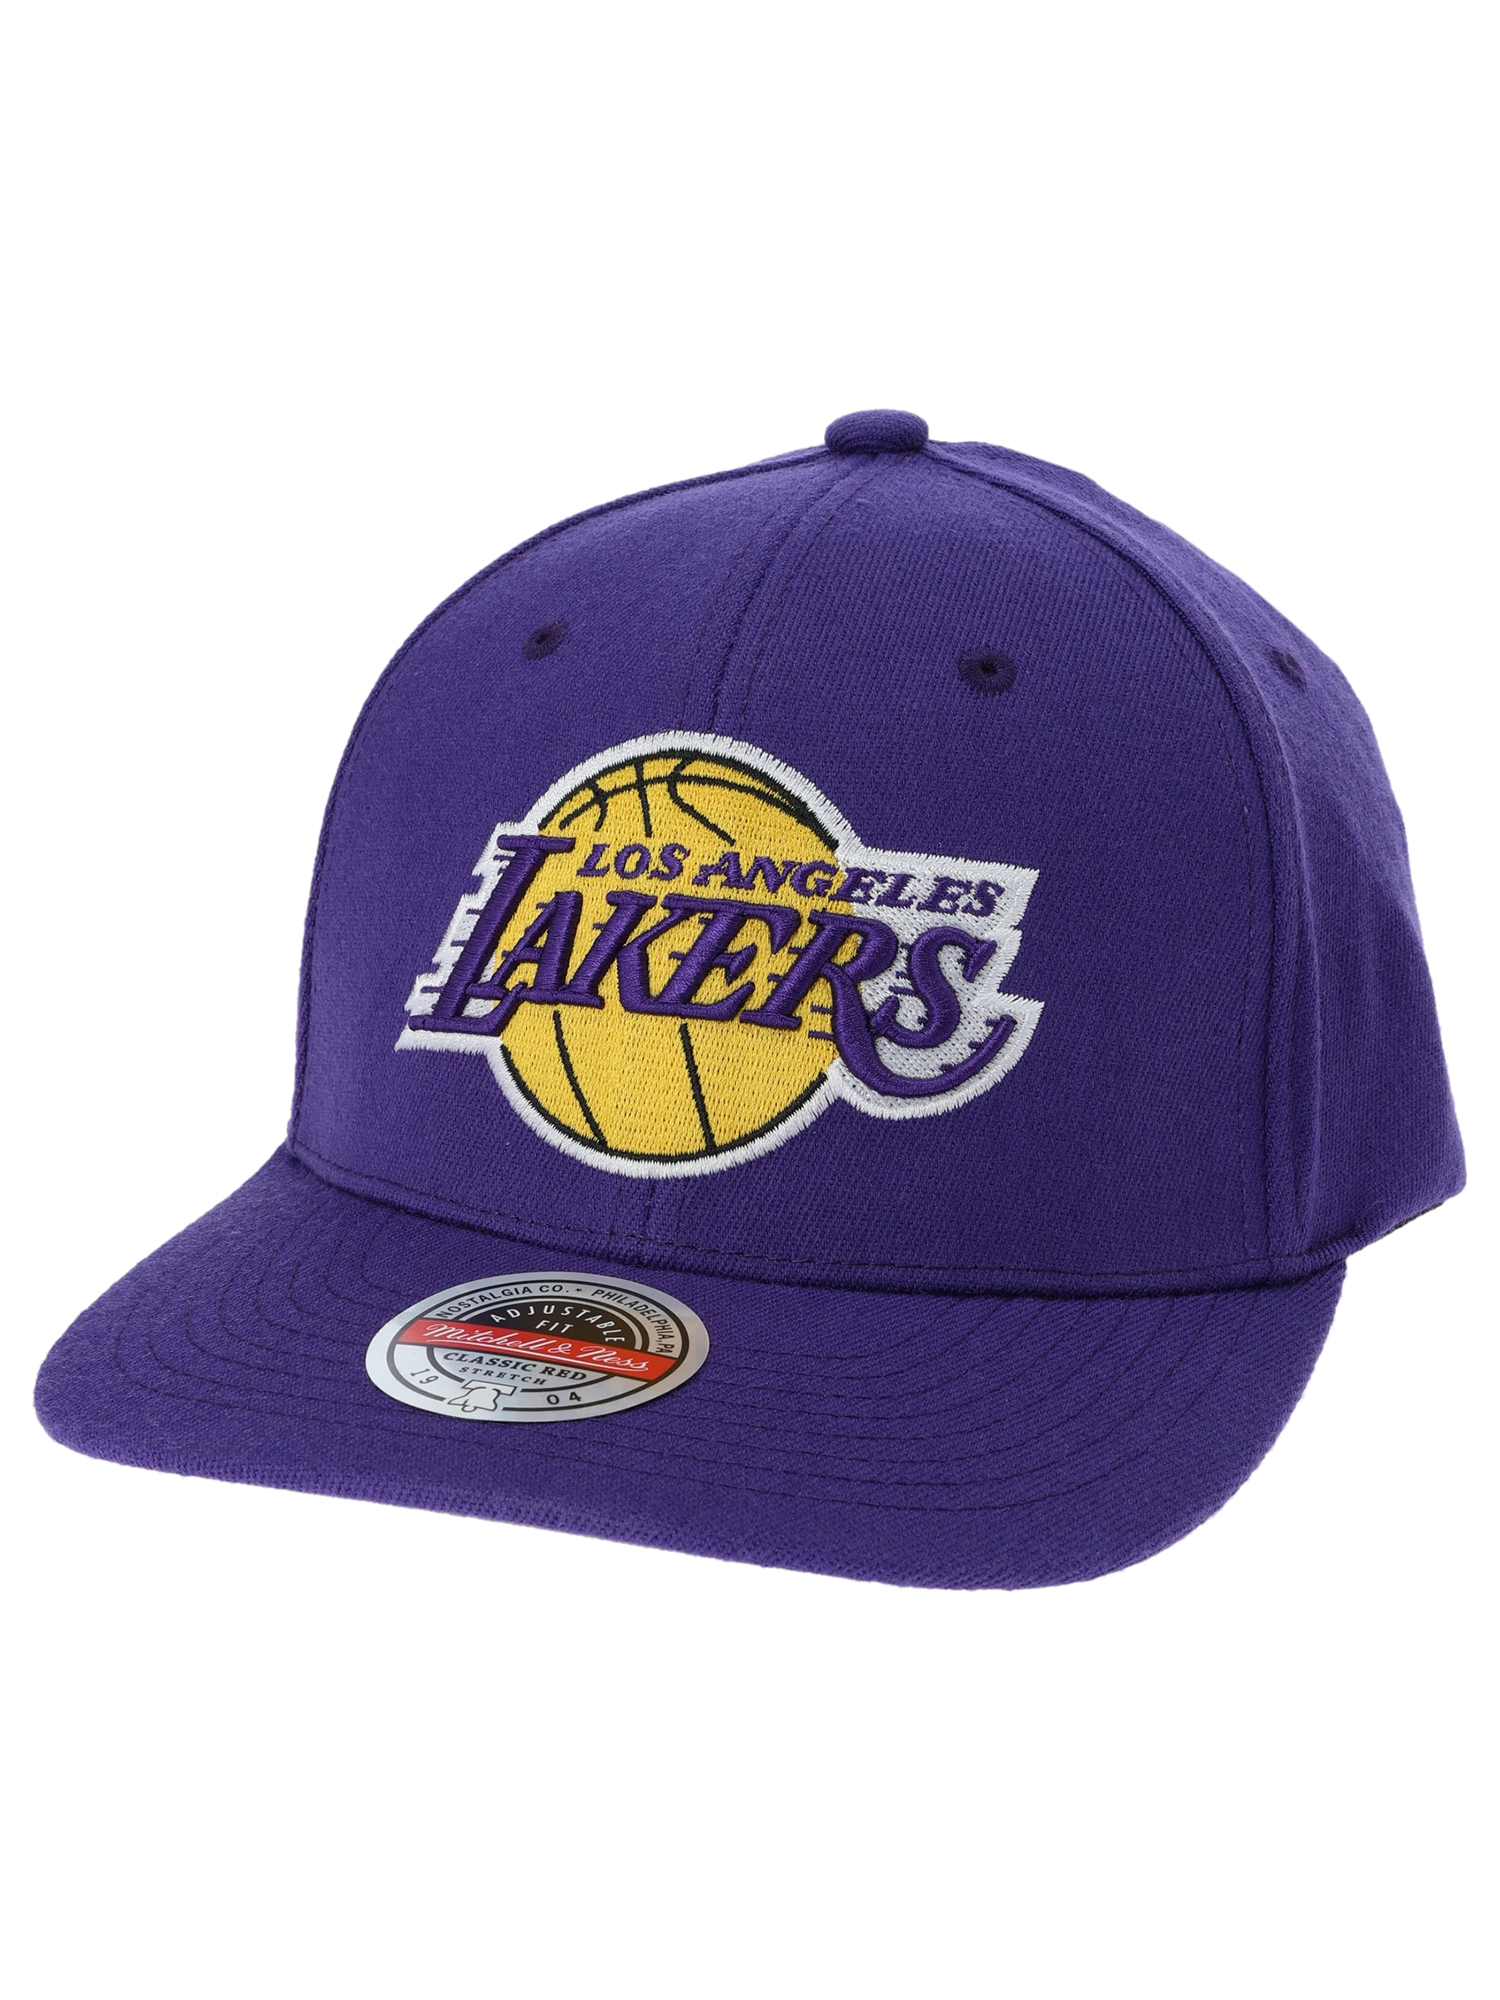 LOS ANGELES LAKERS キャップ